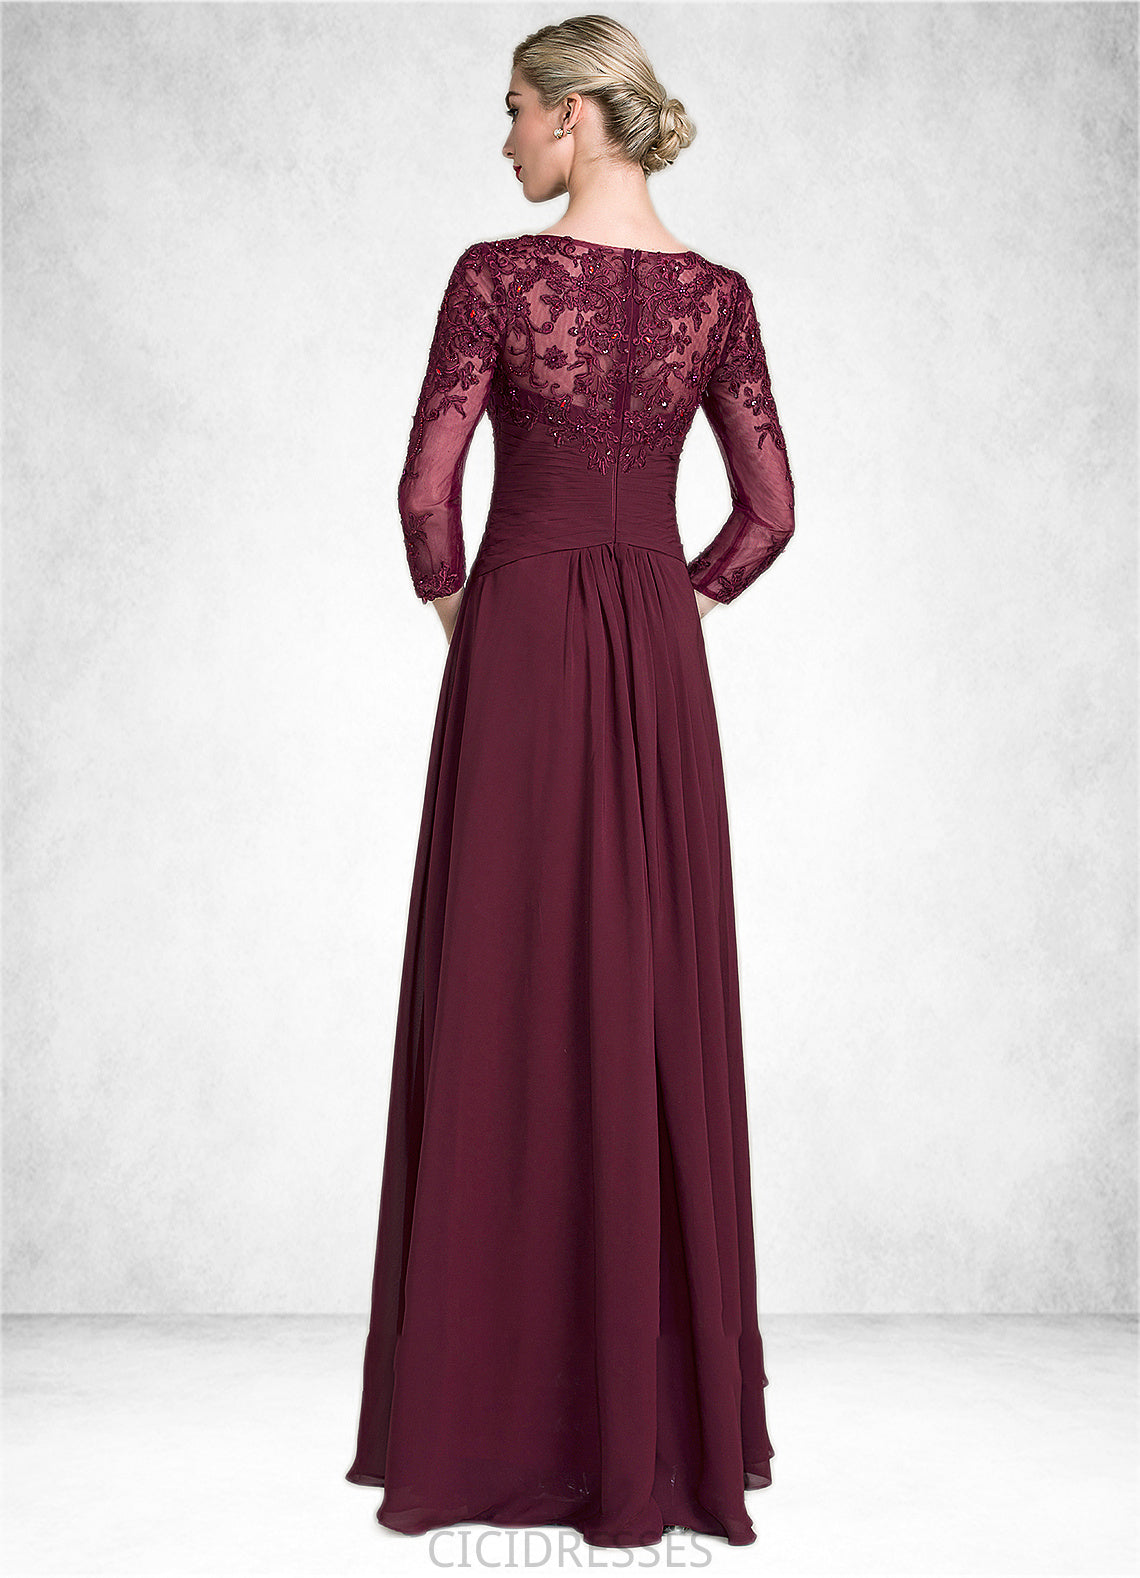 Kaylee A-Line Scoop Neck Floor-Length Chiffon Lace Mother of the Bride Dress With Ruffle Beading Sequins CIC8126P0014792